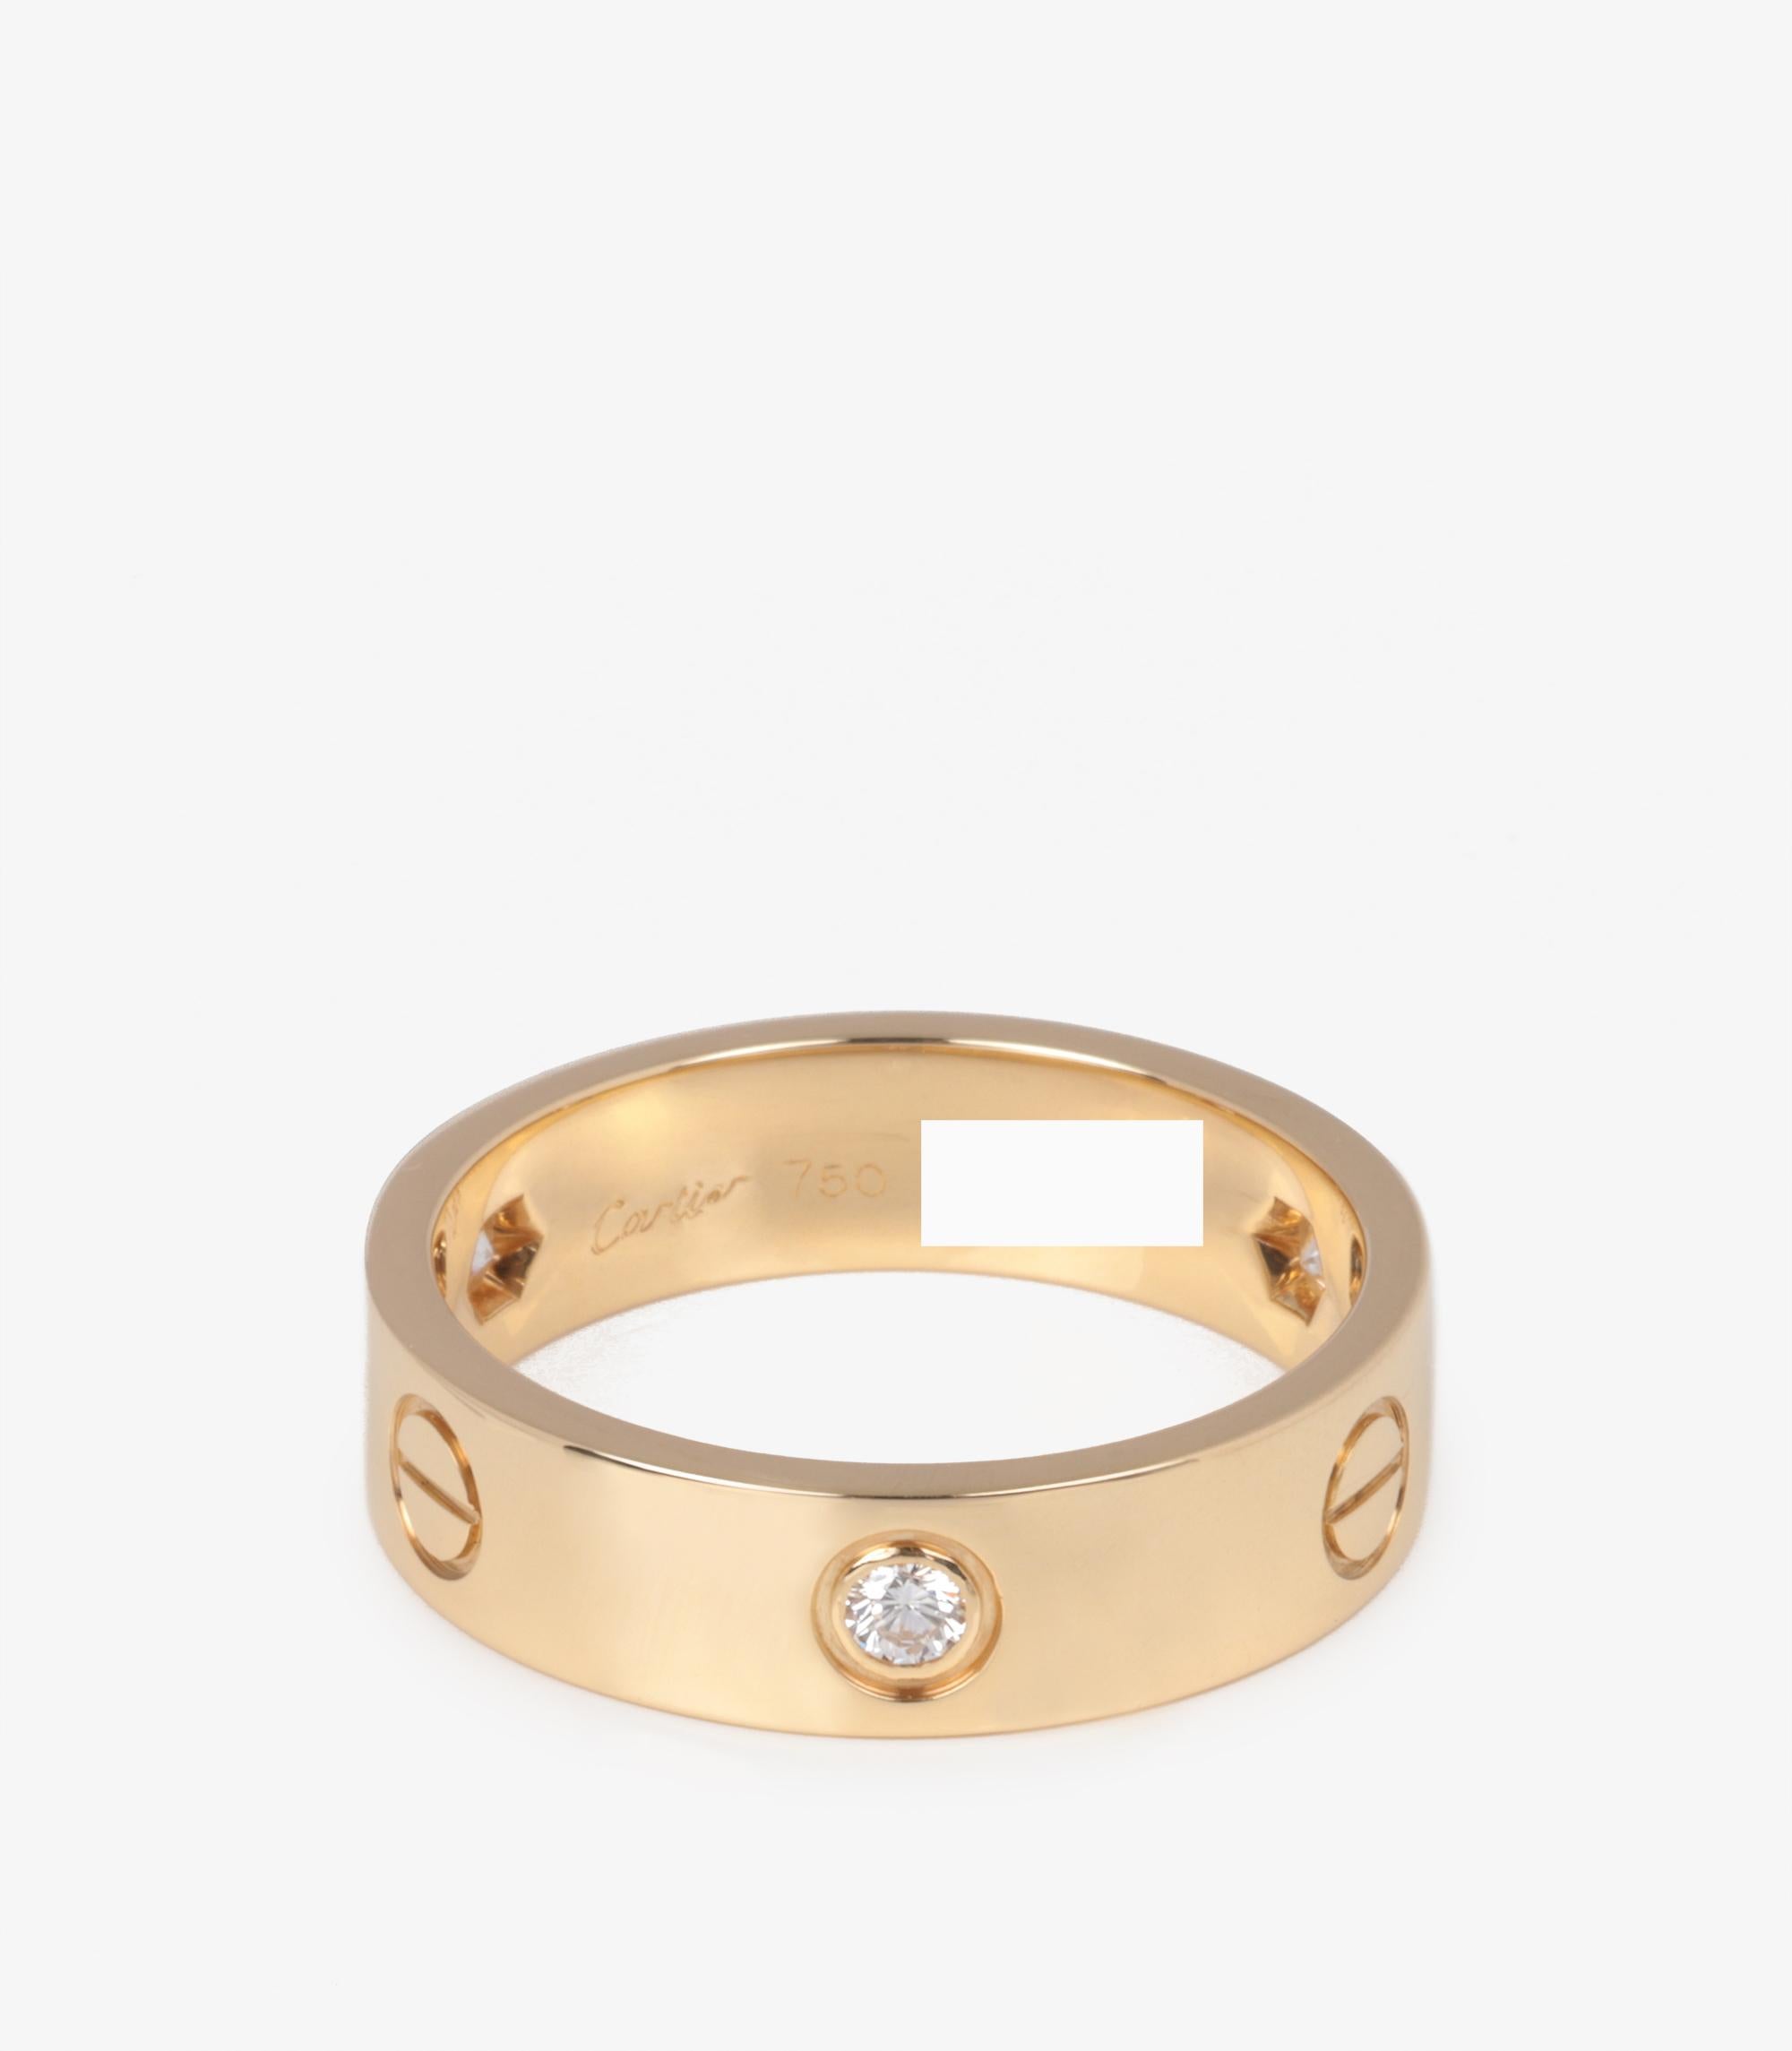 Cartier 3 Diamond 18ct Yellow Gold Love Ring

Brand- Cartier
Model- 3 Diamond Love Band Ring
Product Type- Ring
Serial Number- HL******
Age- Circa 2006
Accompanied By- Cartier Box, Certificate, Receipt
Material(s)- 18ct Yellow Gold
Gemstone-